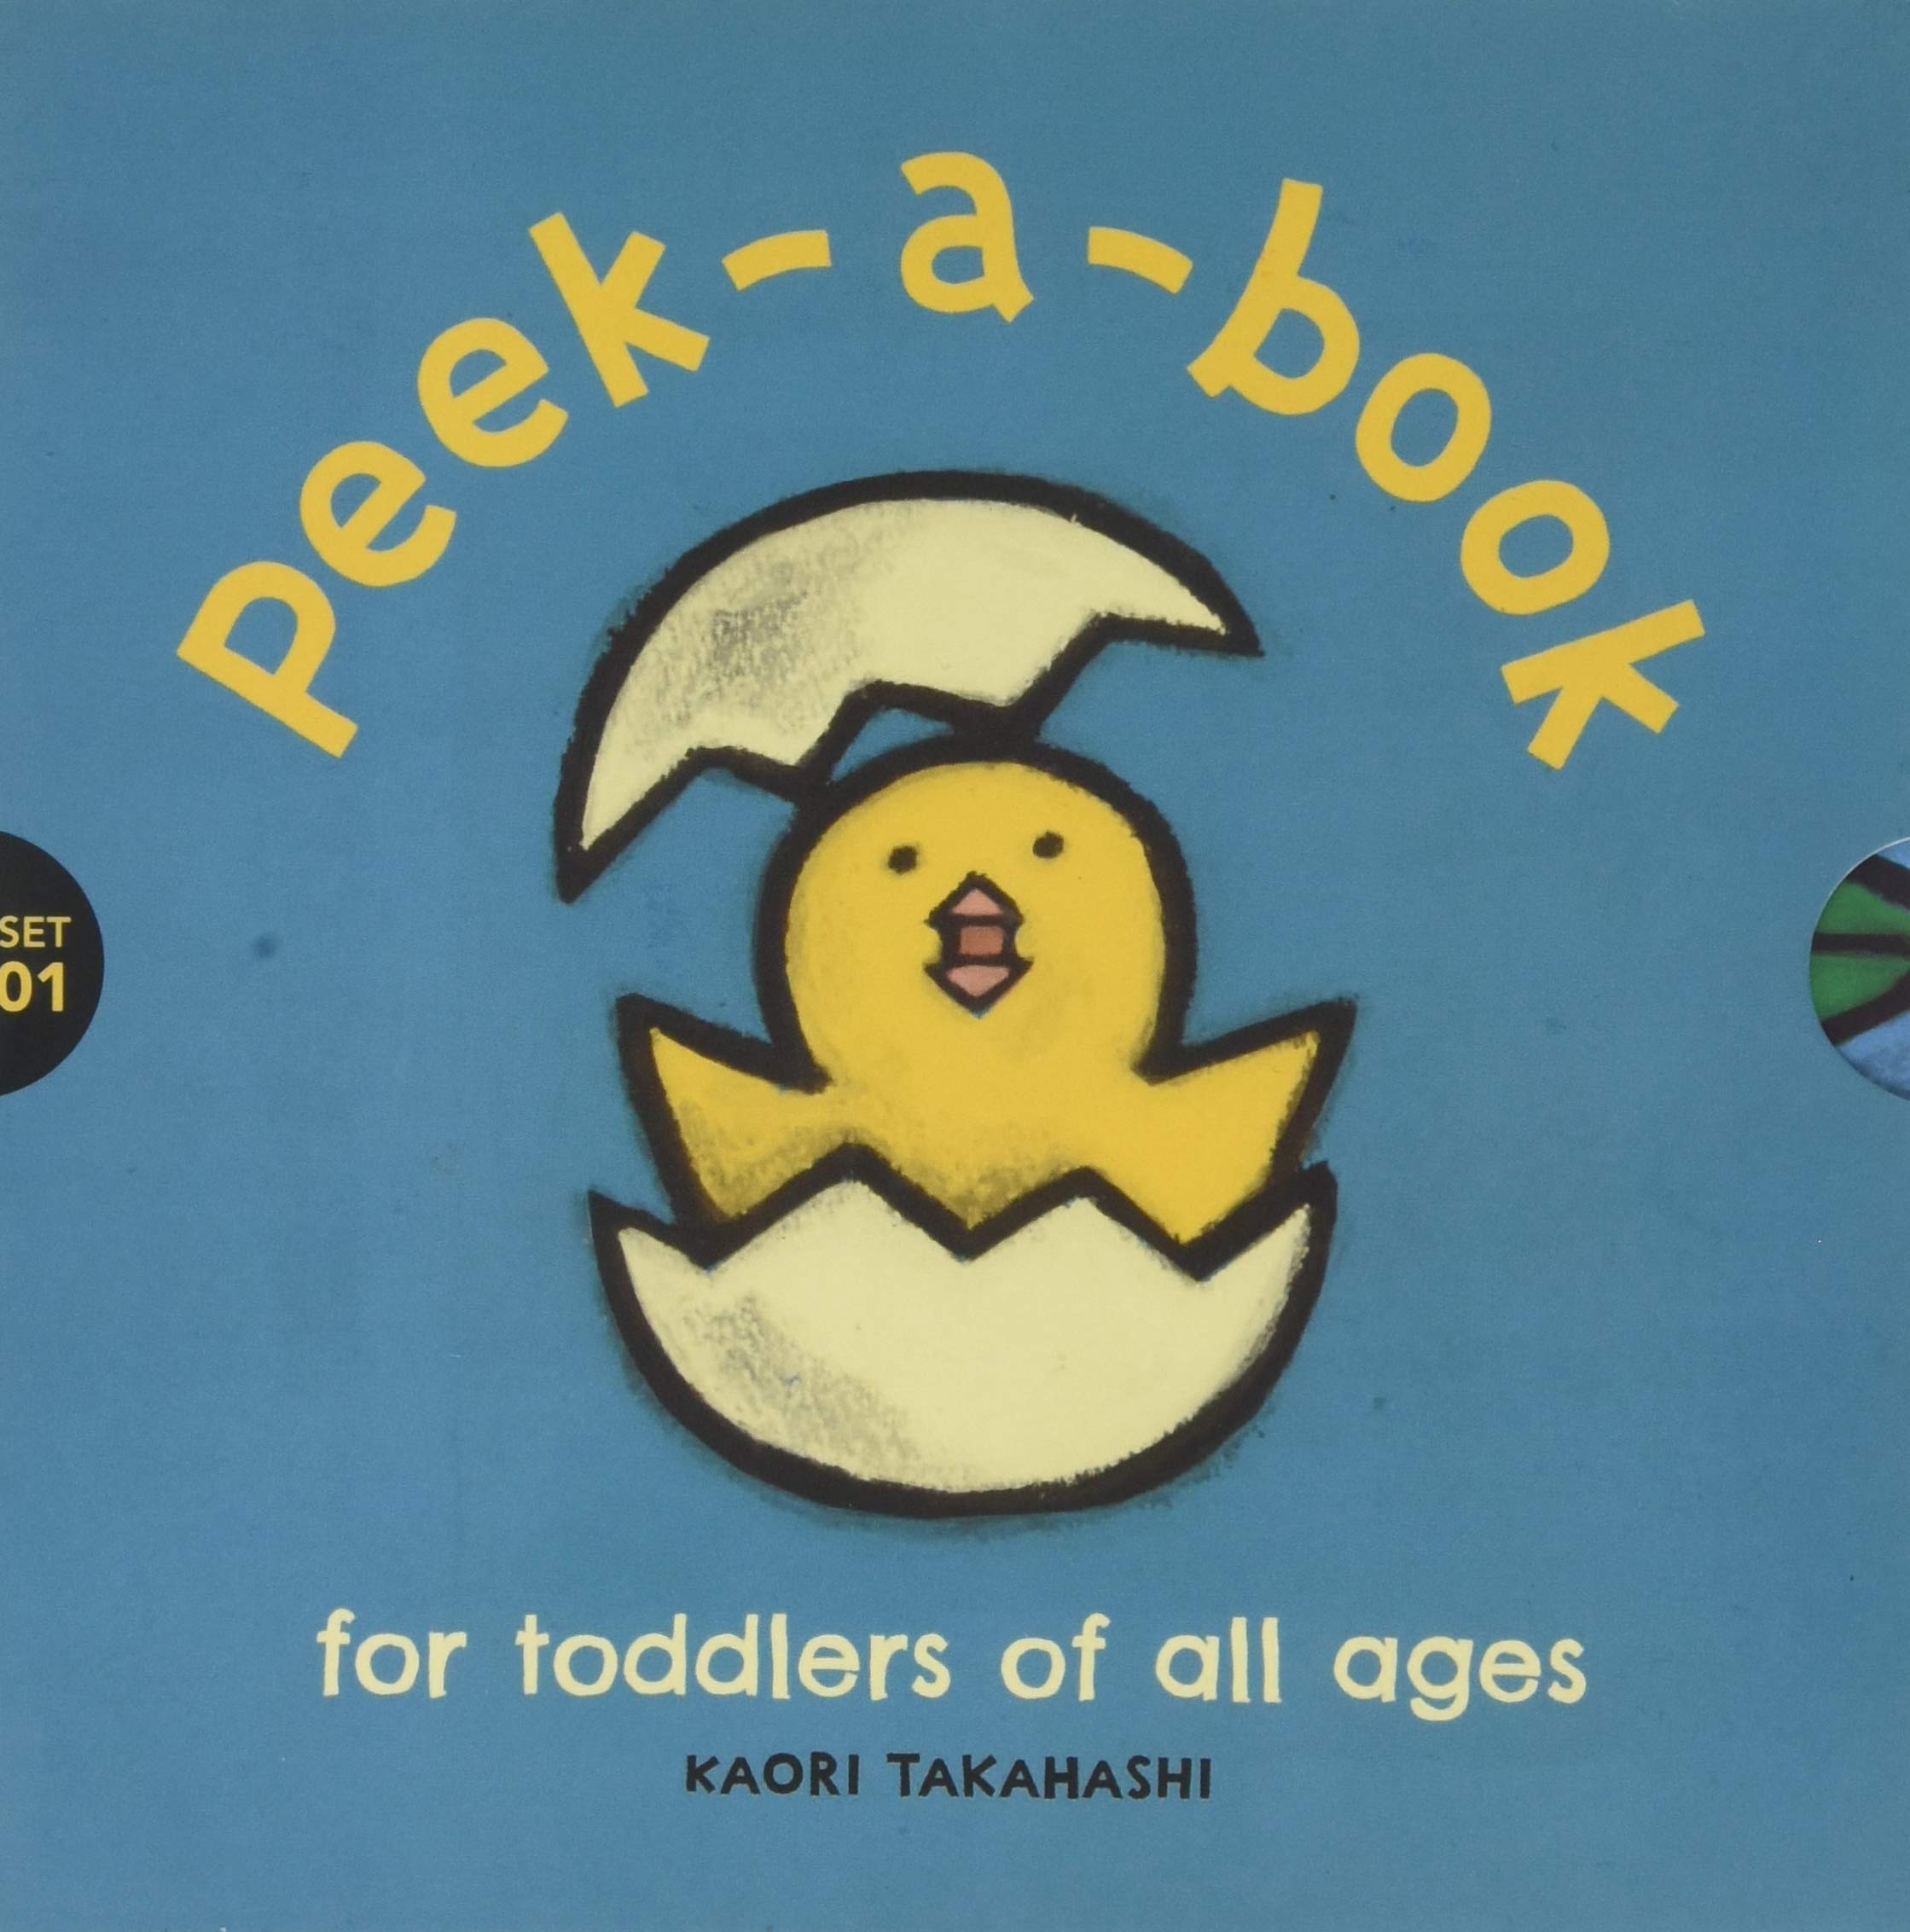 Peek-a-book: For toddlers of all ages